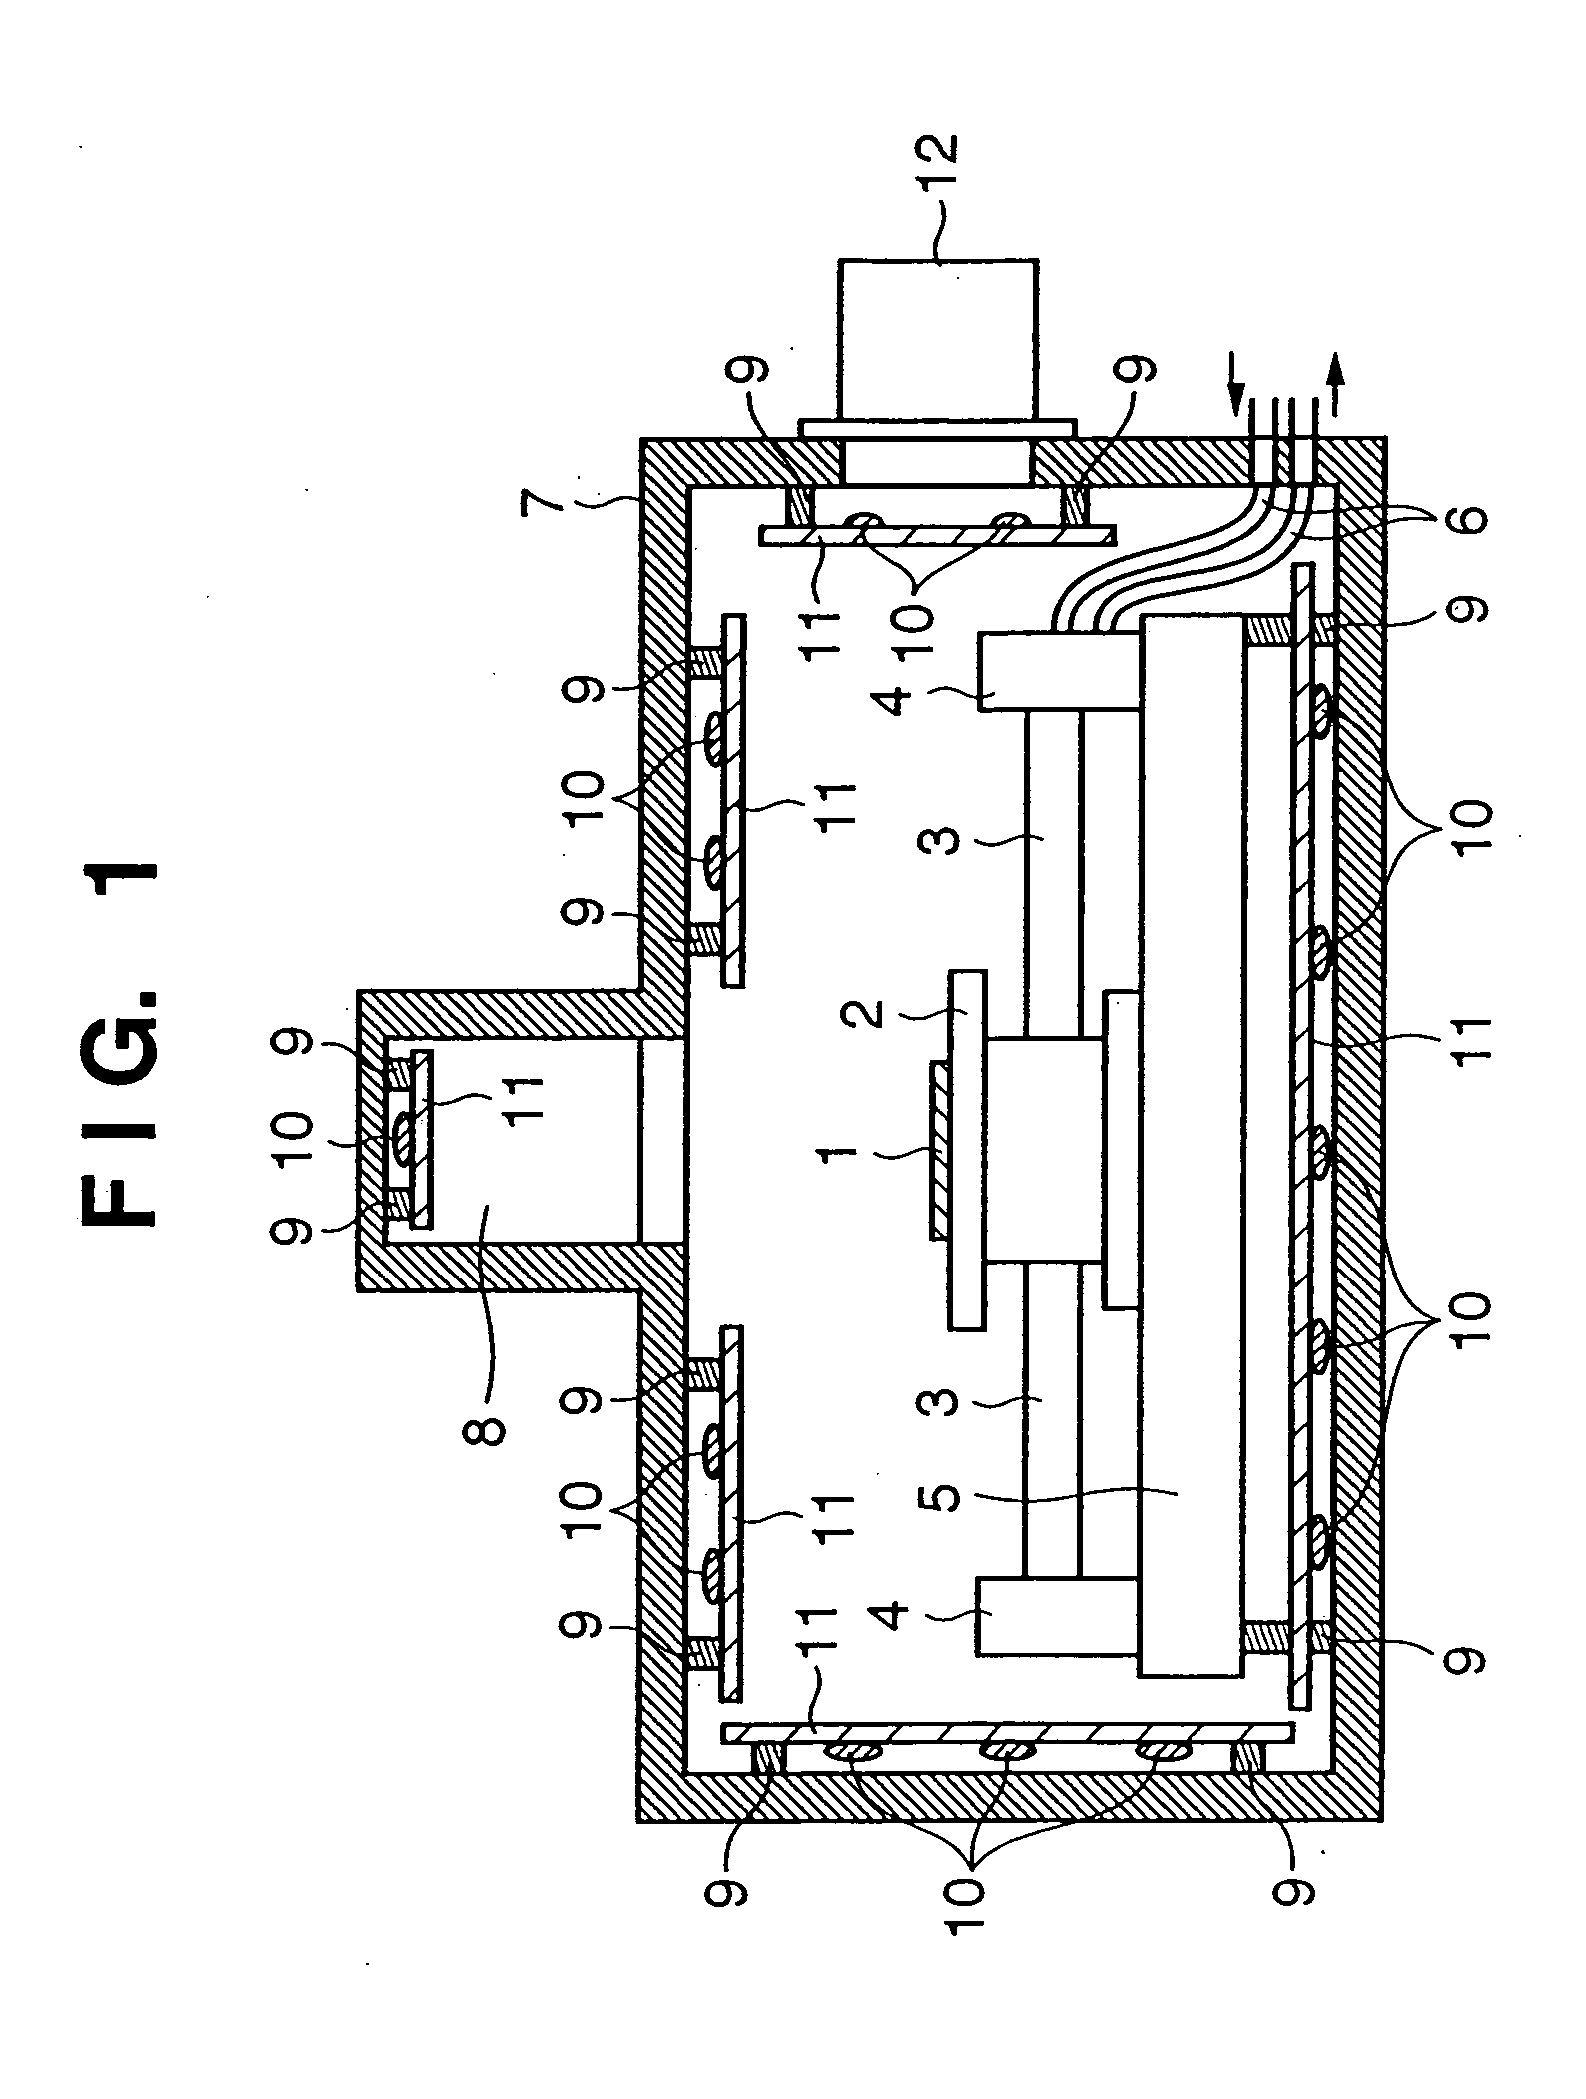 Processing apparatus for processing object in vessel